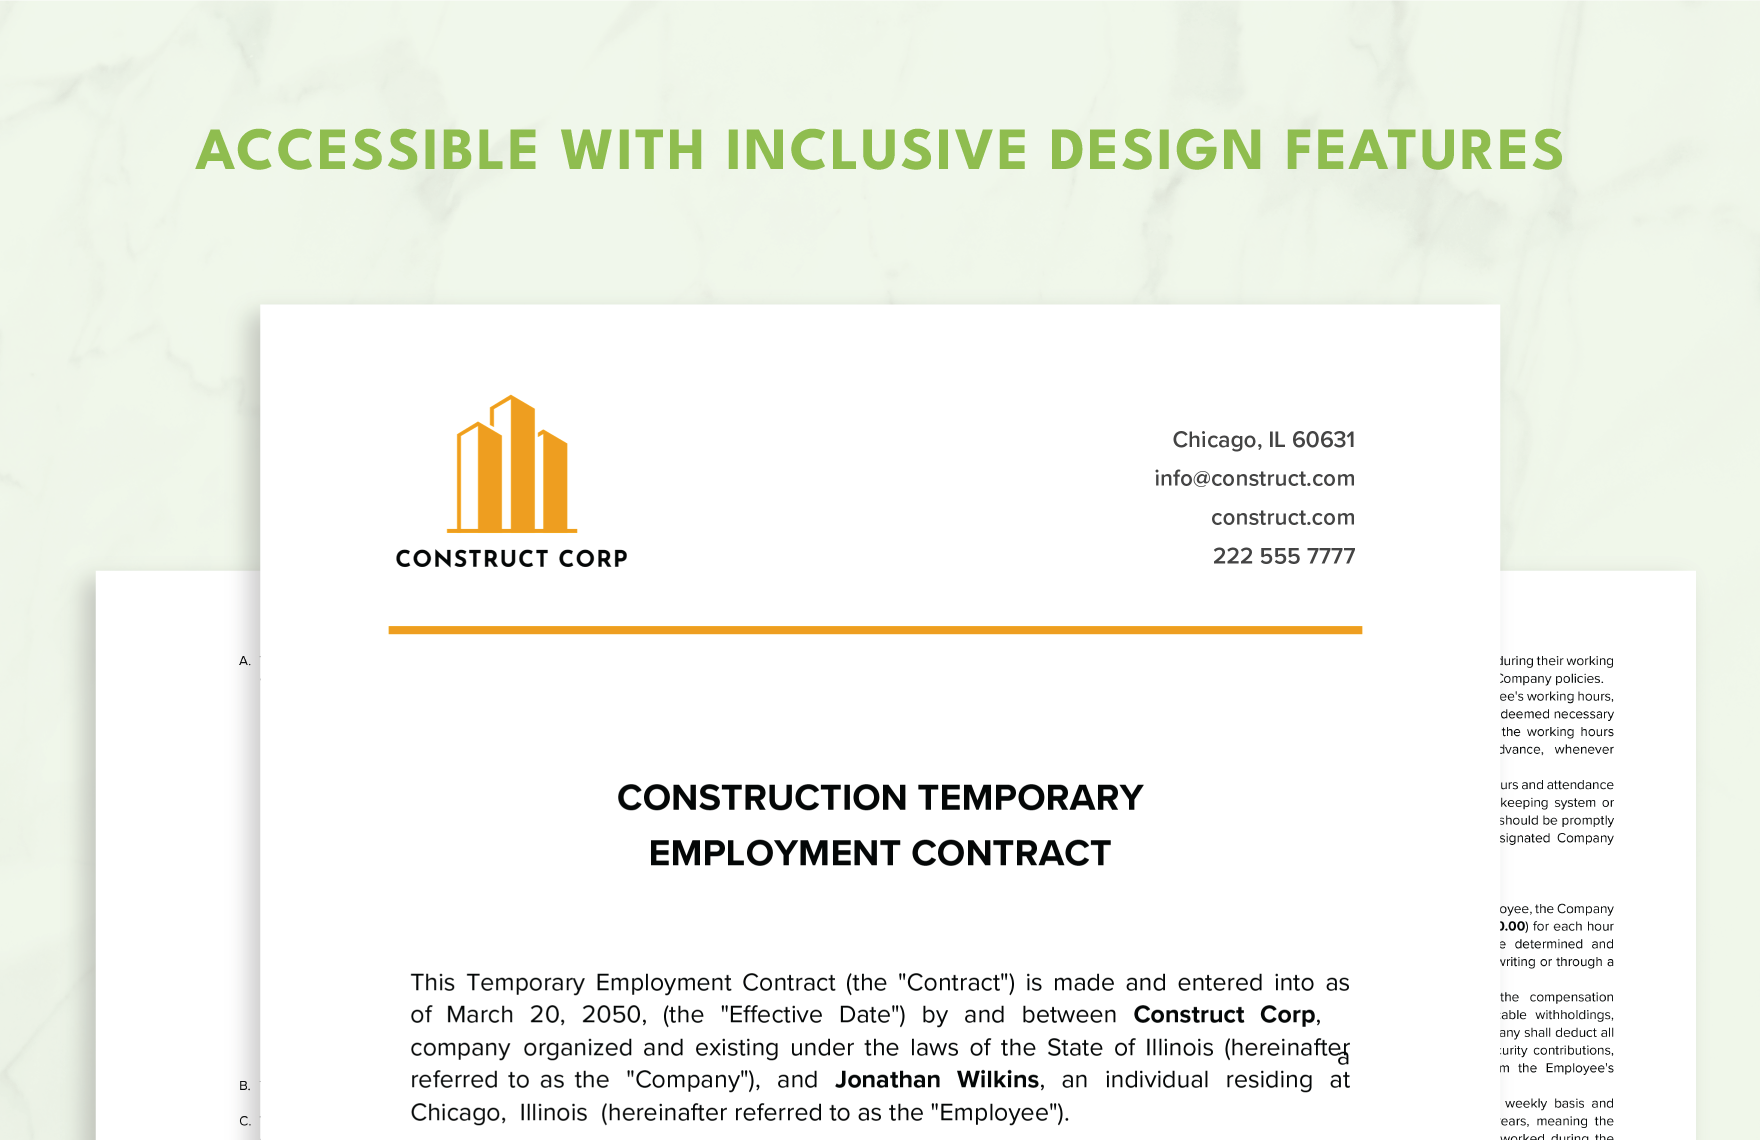 Construction Temporary Employment Contract Template